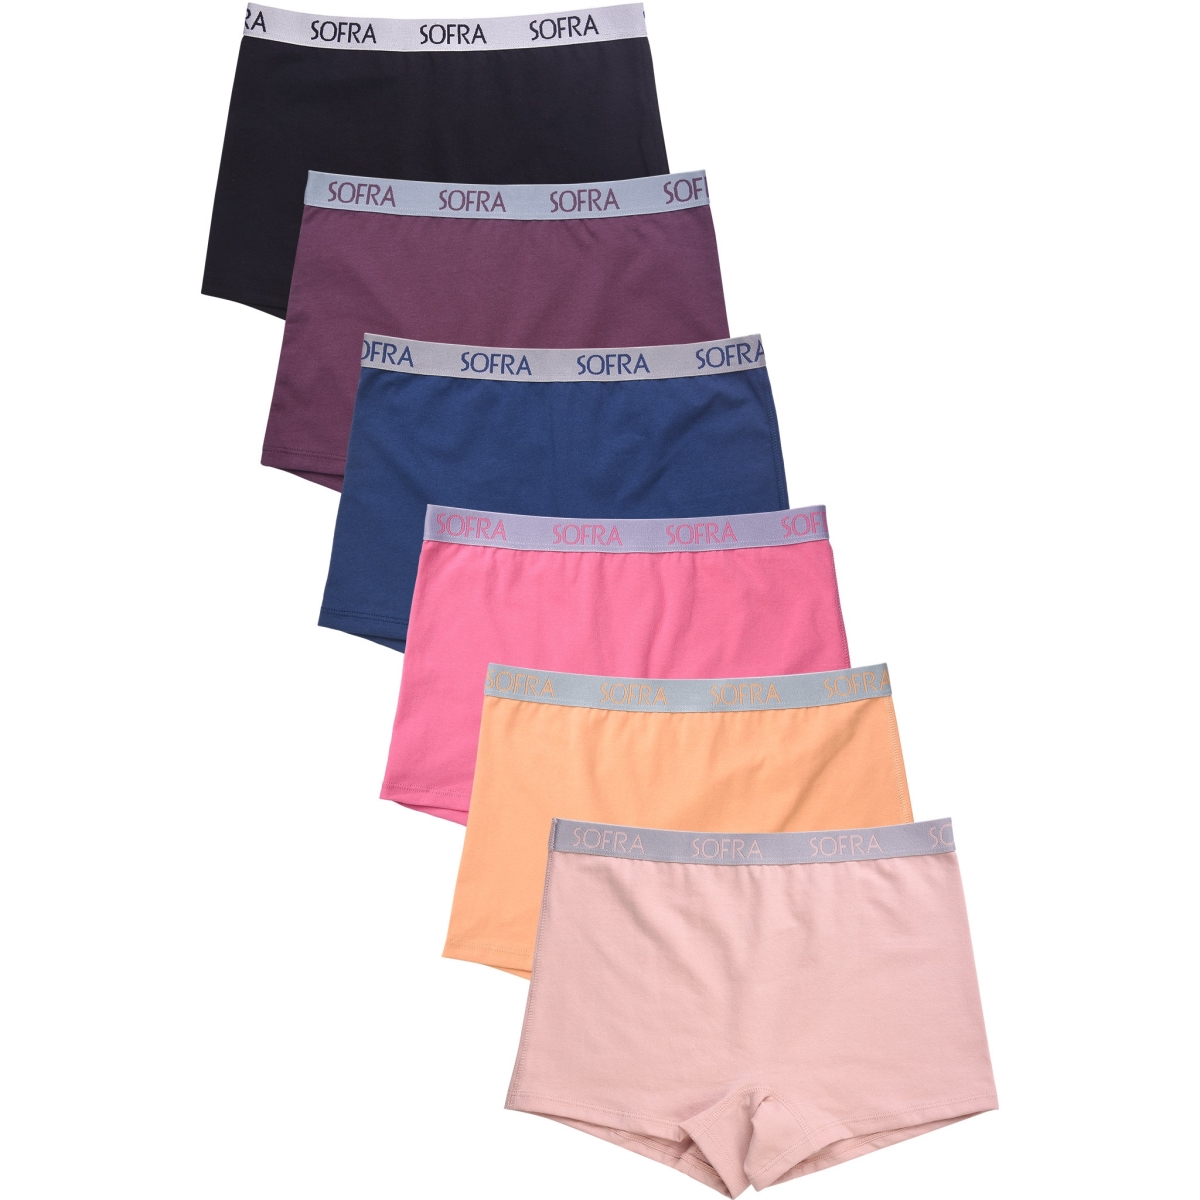 Picture of 247 Frenzy 247-LP1422CB4-XL Sofra Womens Essentials Cotton Stretch Boyshort Panty Underwear - Assorted Color - Extra Large - Pack of 6